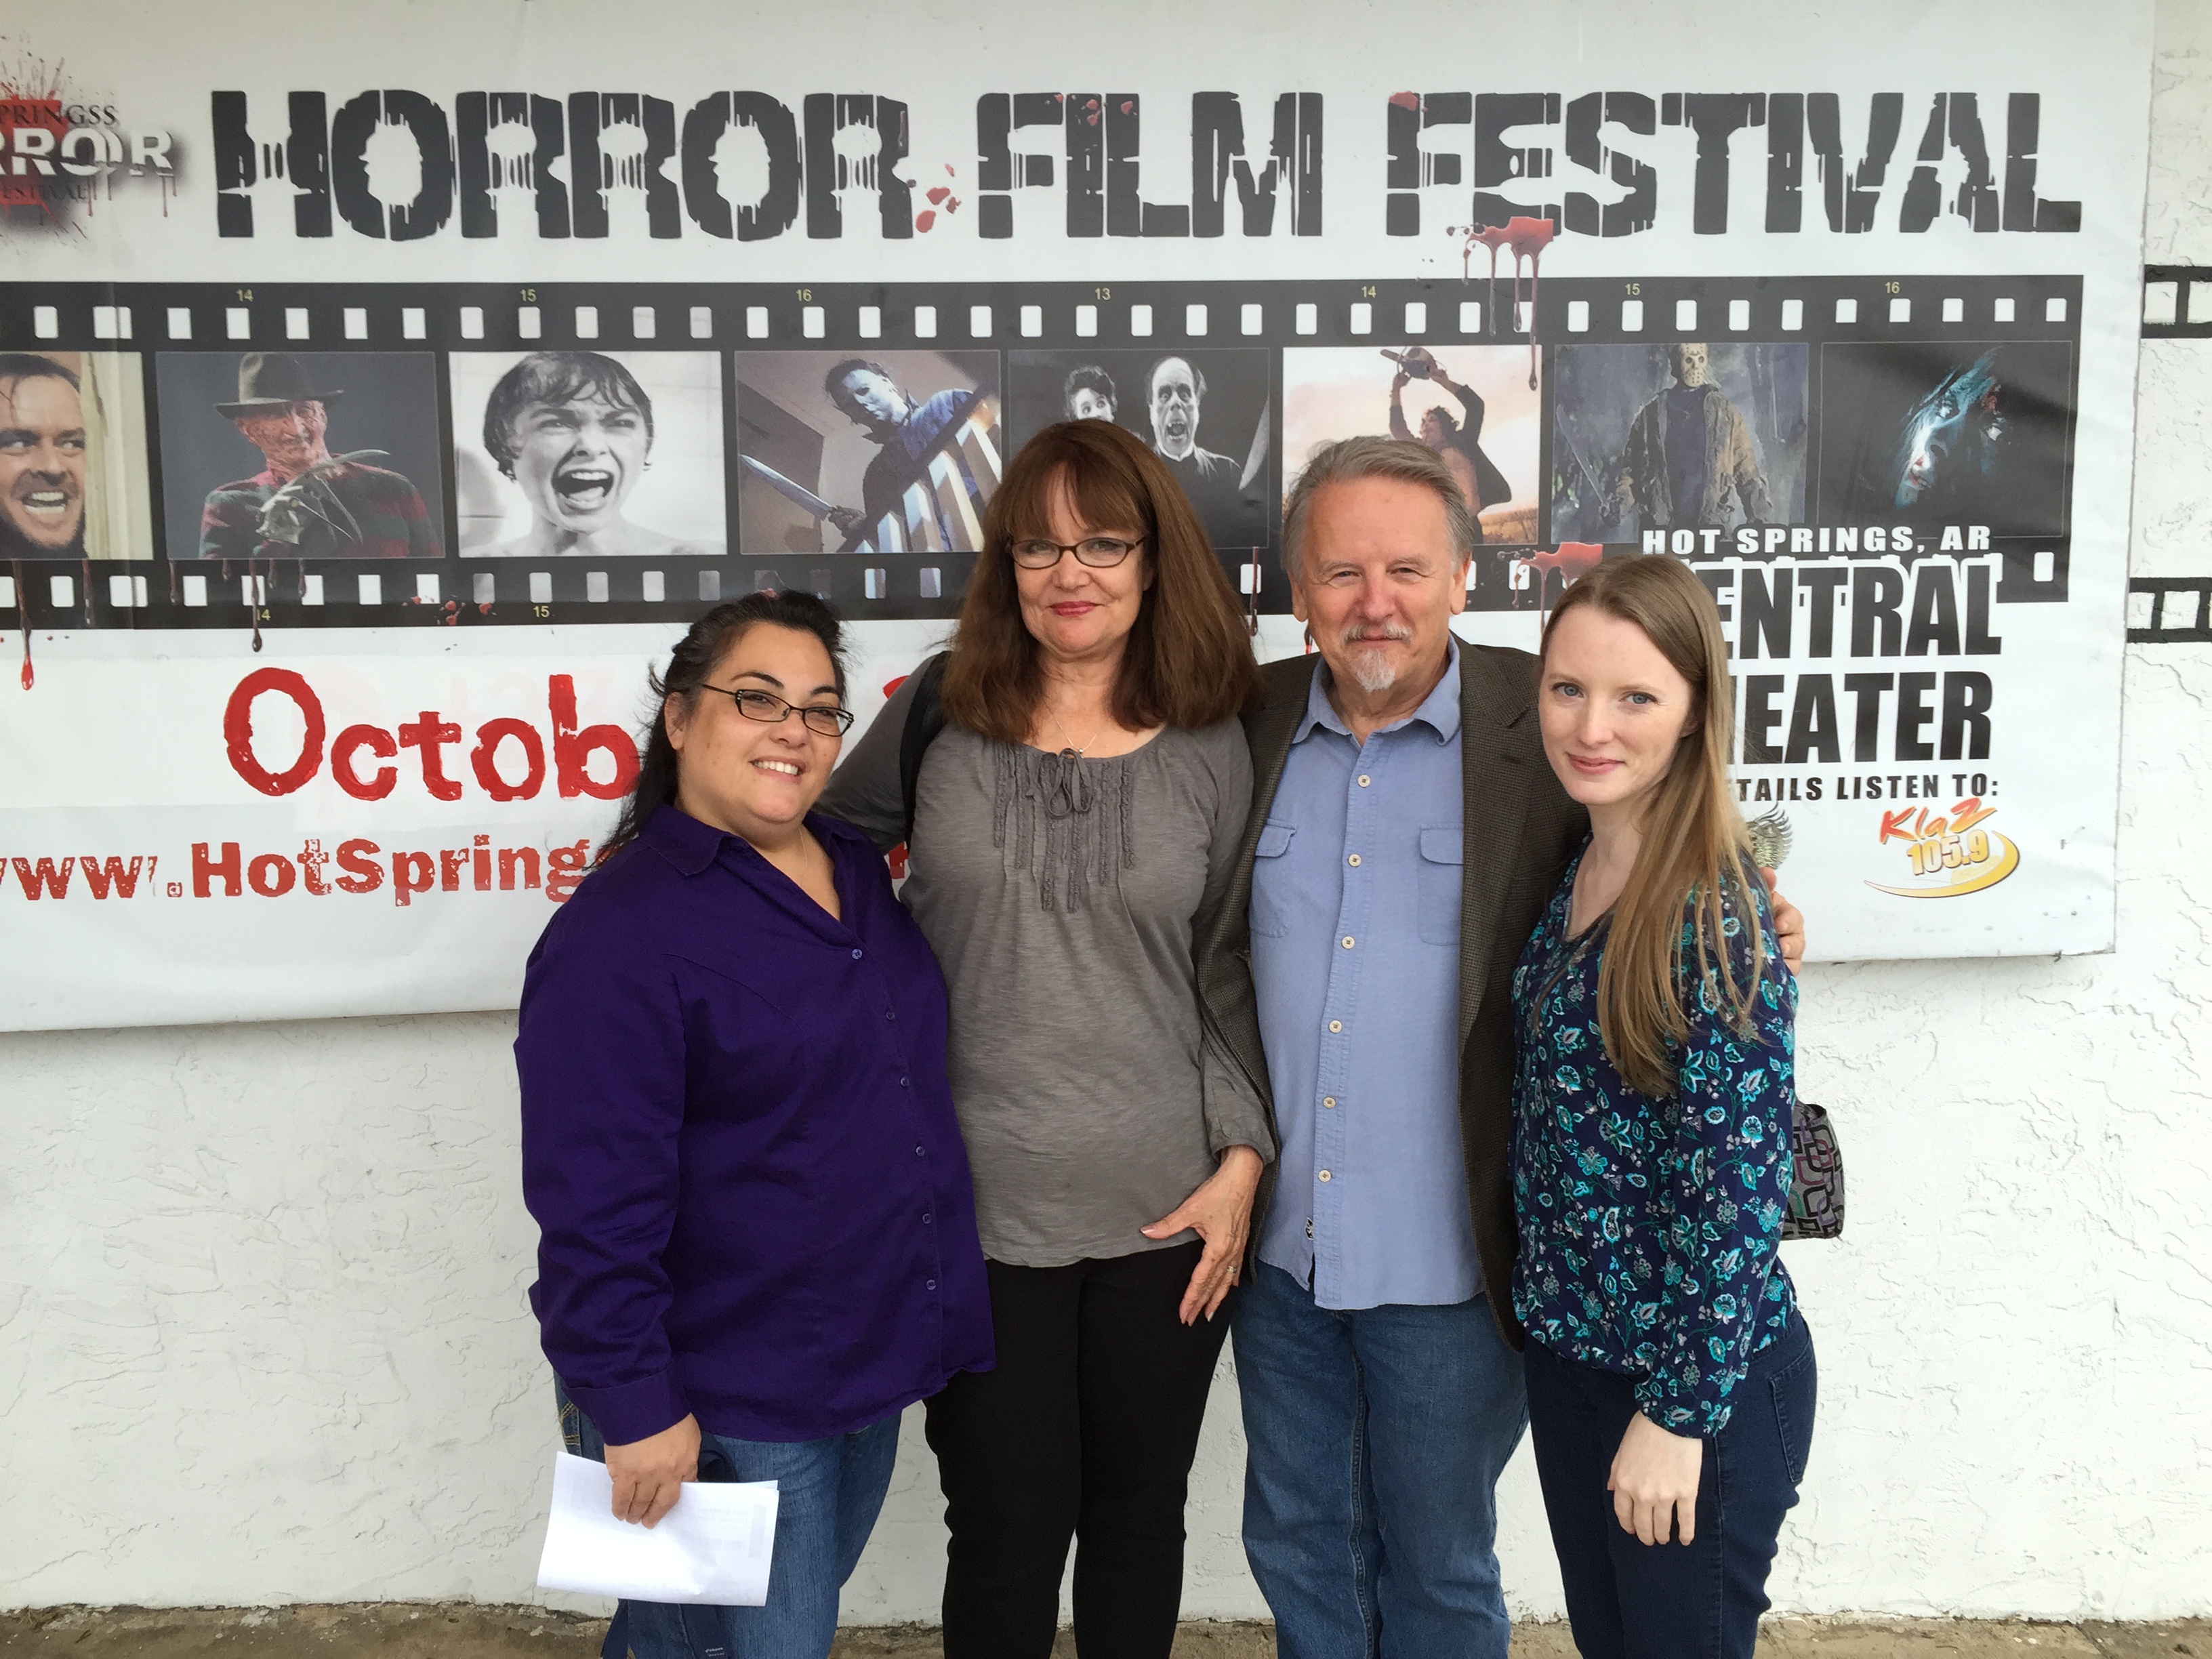 The premiere of our film, THE PHONE IN THE ATTIC, at the 2014 Hot Springs Horror Film Fest with (from L to R)cast member Diana Shepherd, Executive Producer Carol Long, Director Jim Long and cast member Victoria Fox.